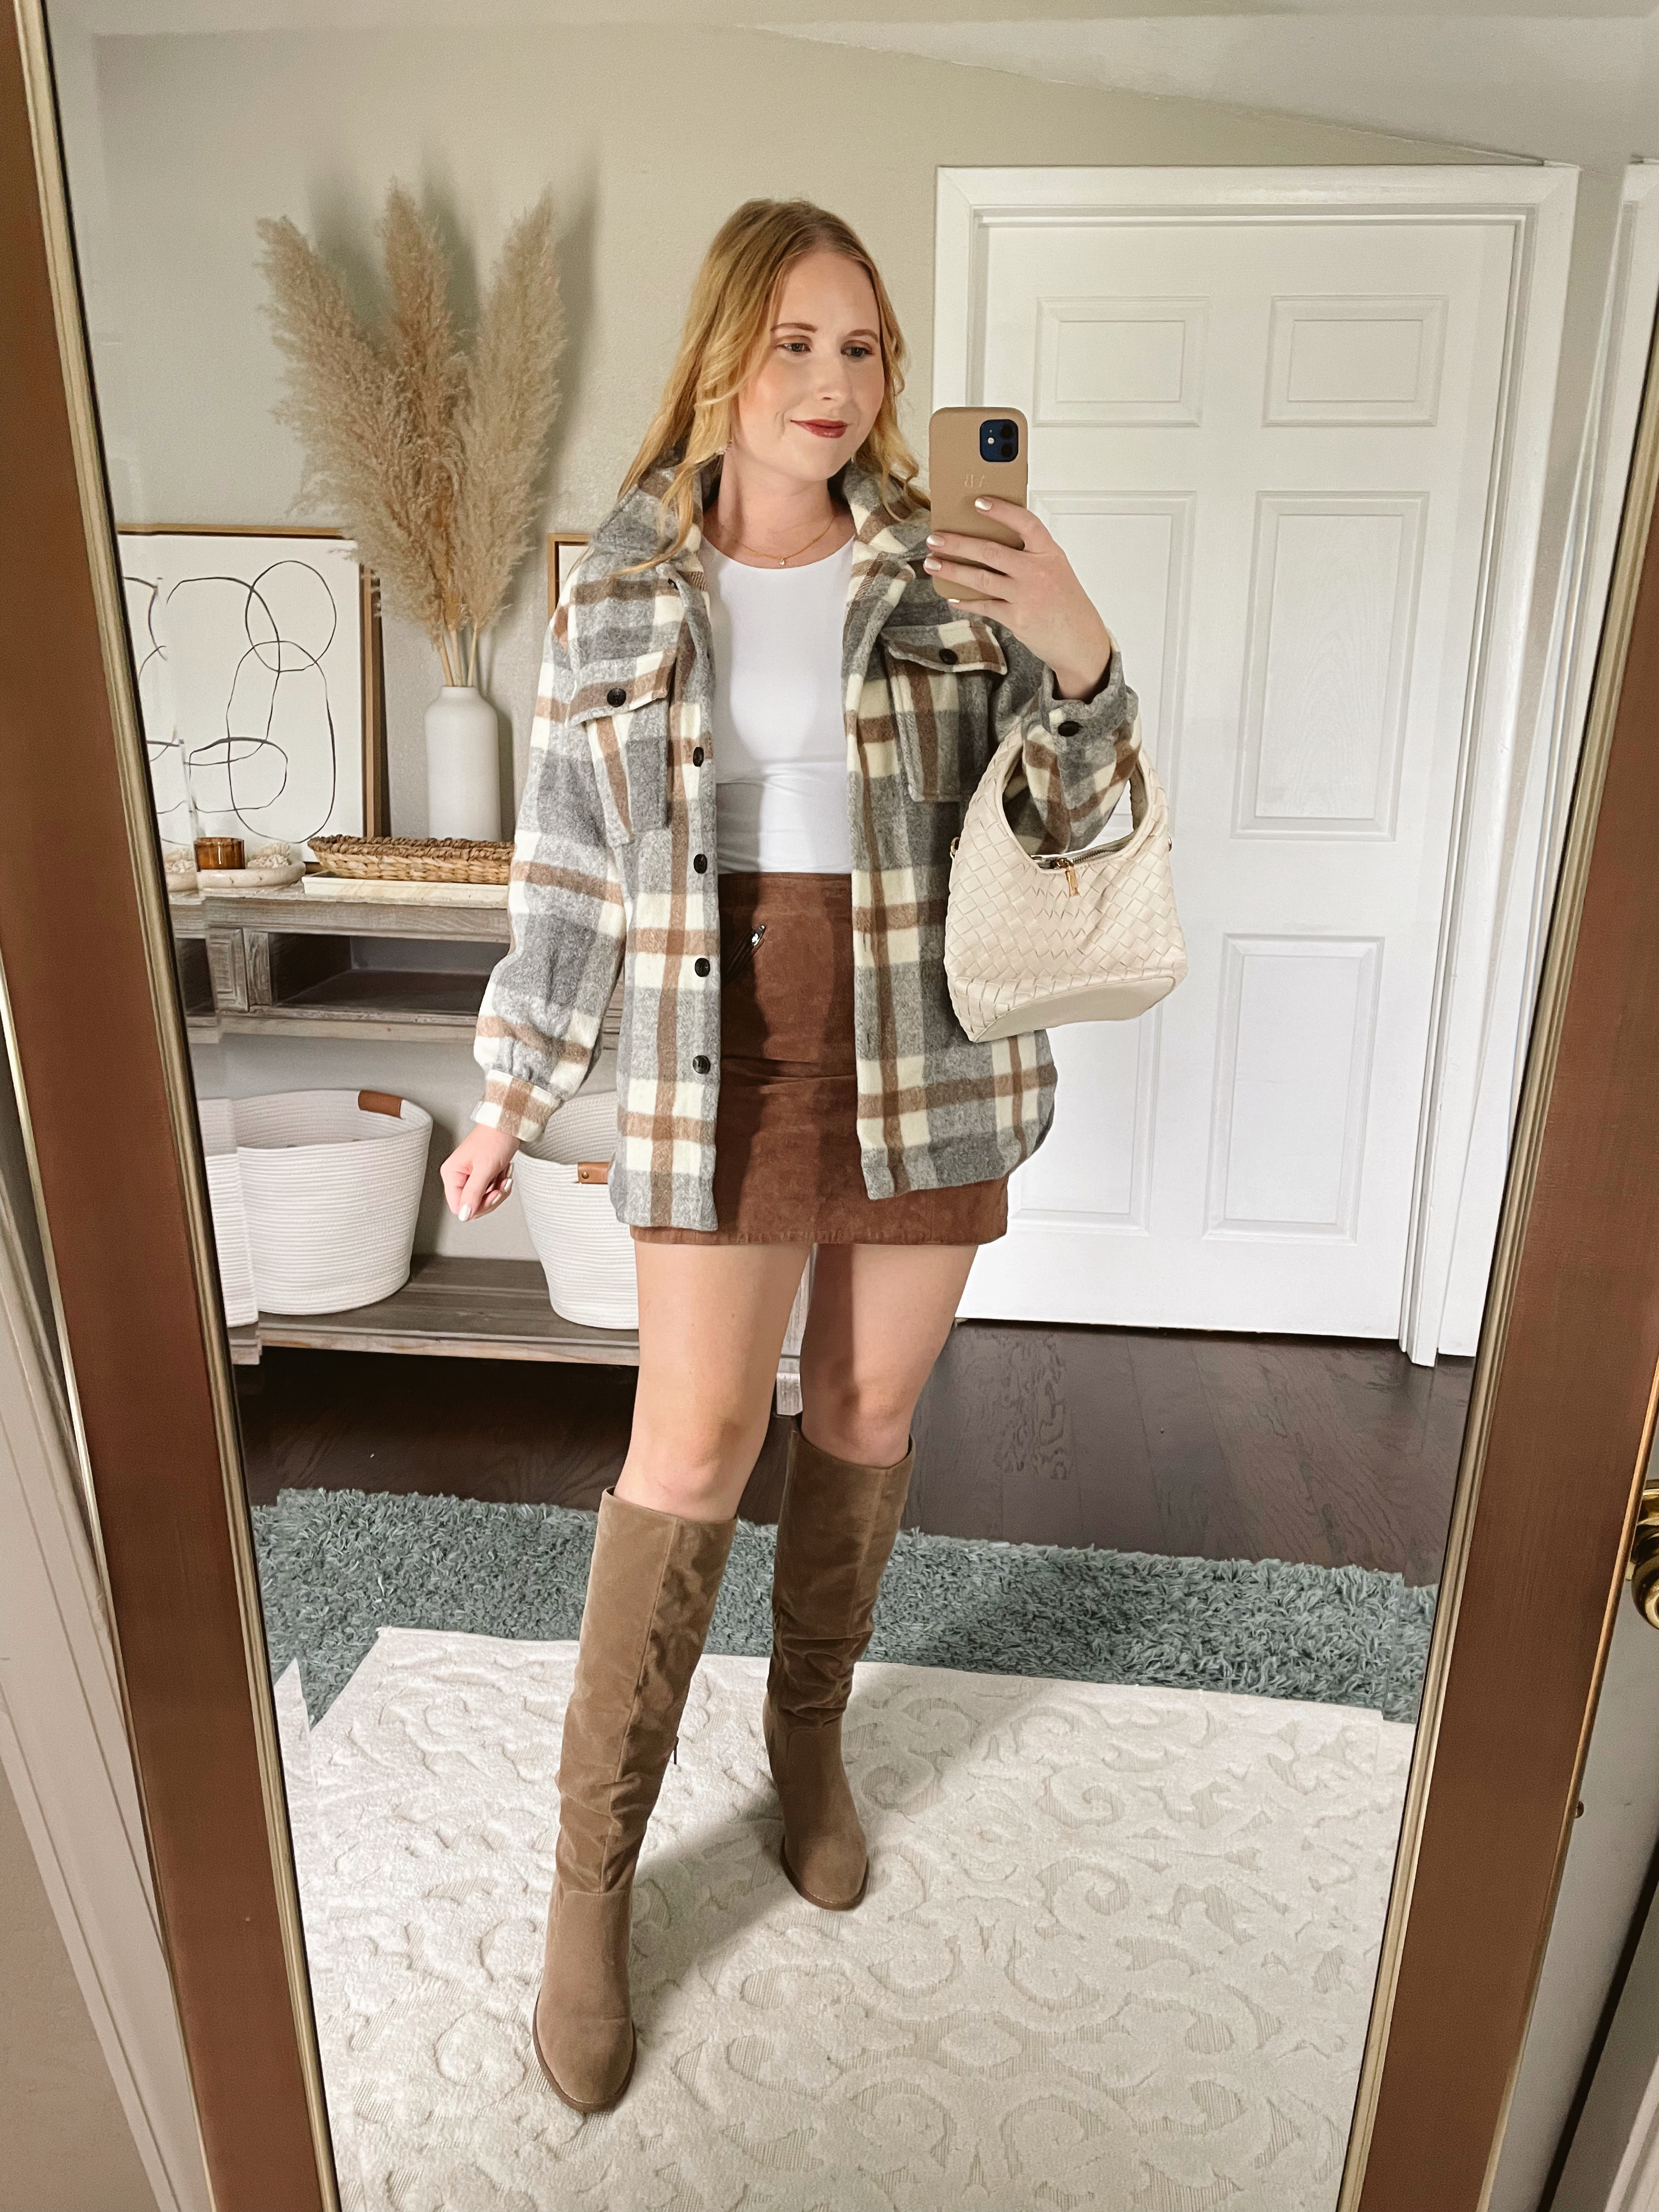 BTFBM Women's Long Sleeve Button Down Jackets Plaid Flannel Shirt Jacket, Brown Mini Skirt, Taupe Knee High Boots - Fall Outfit from Amazon